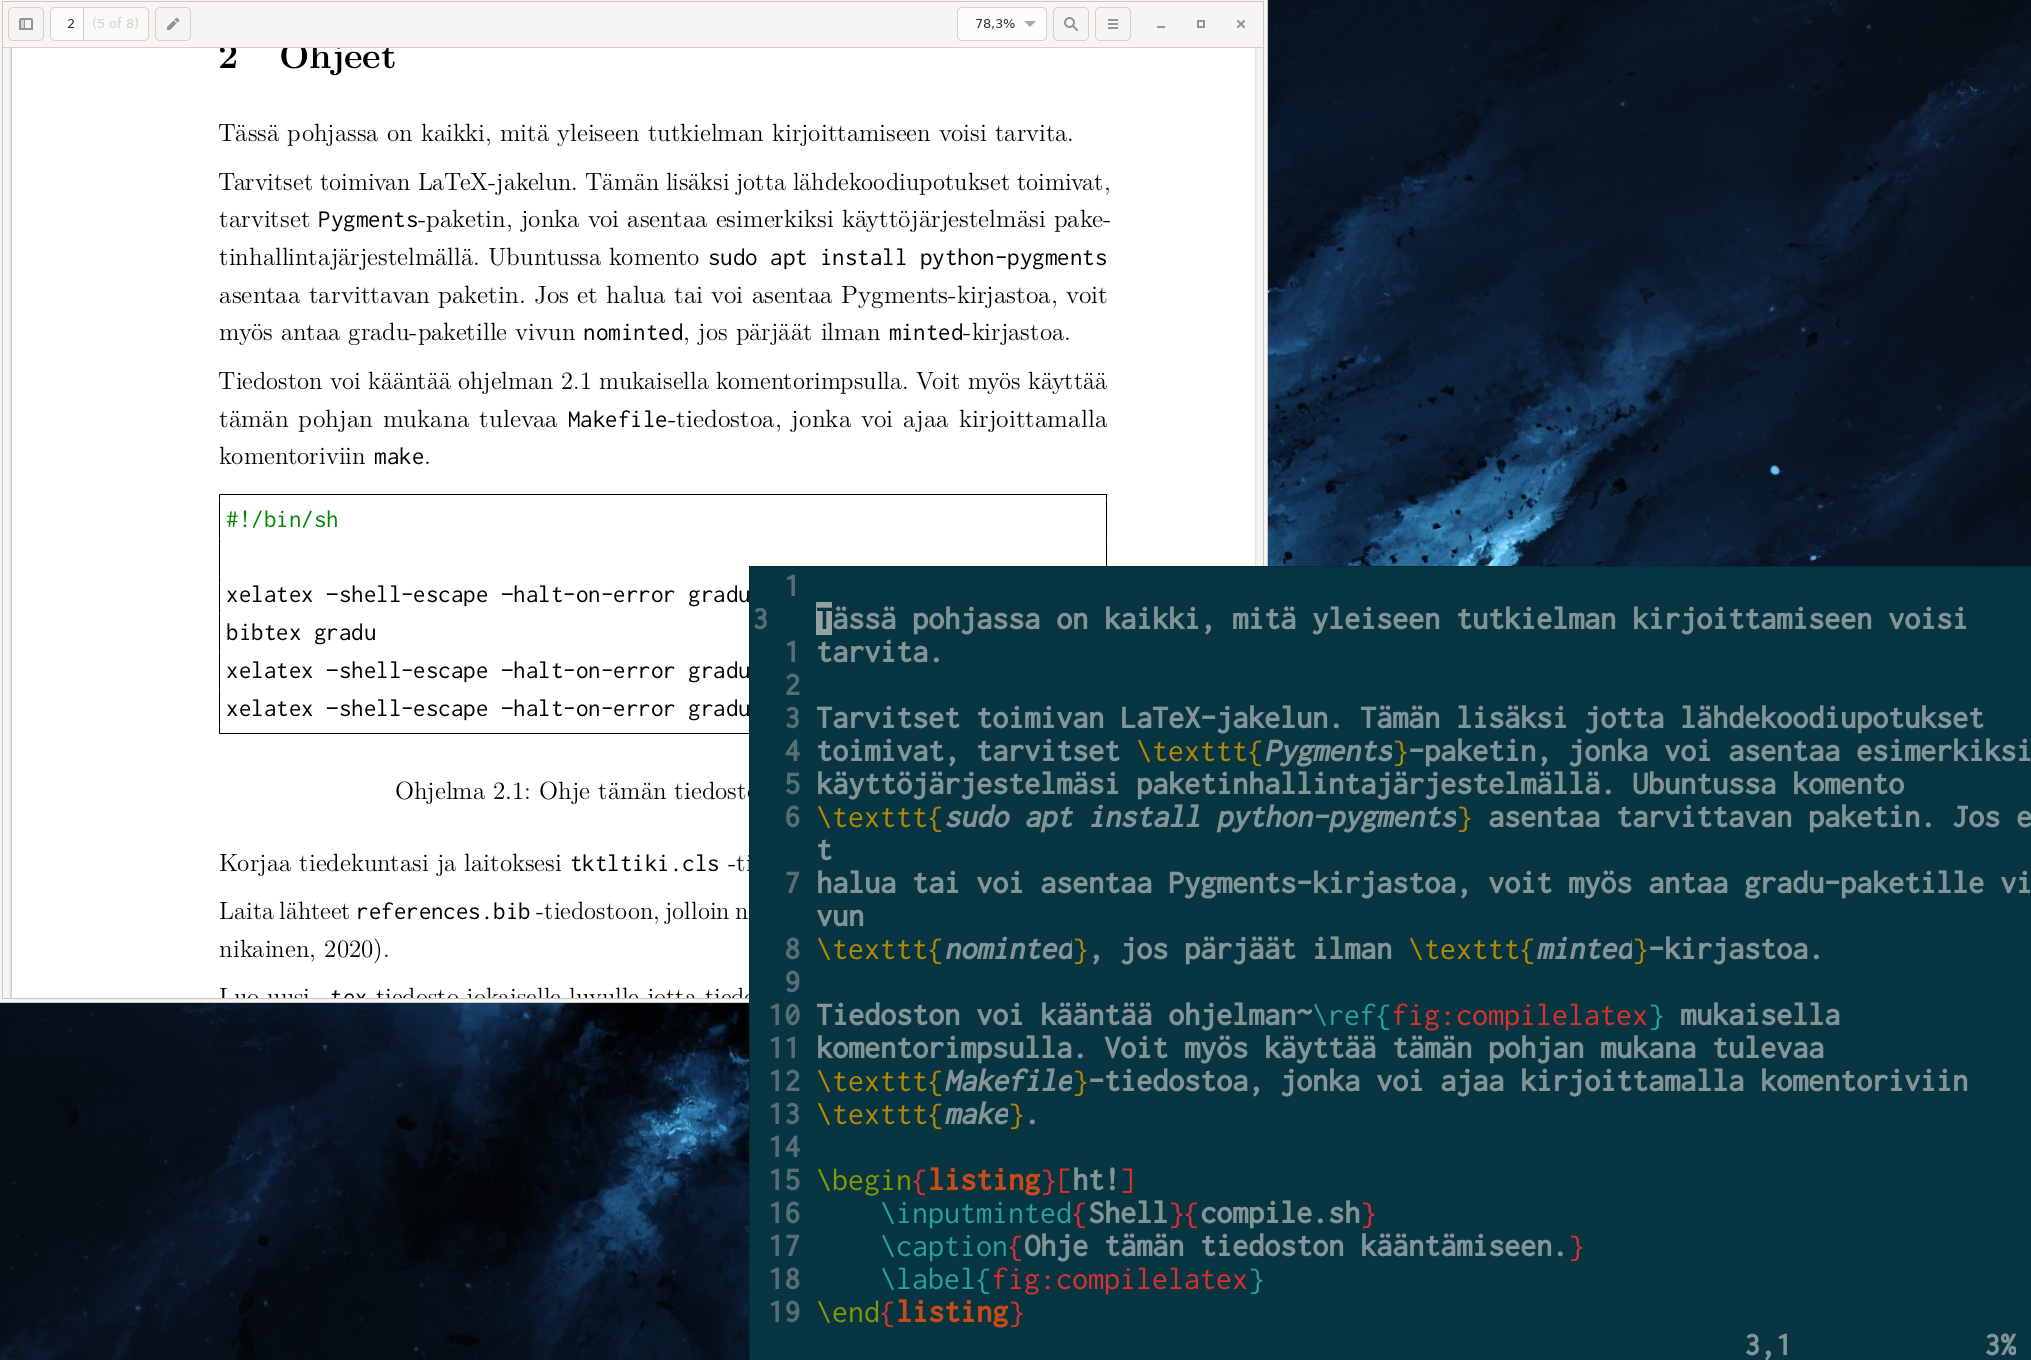 A screenshot of LaTeX code and pdf generated from it.